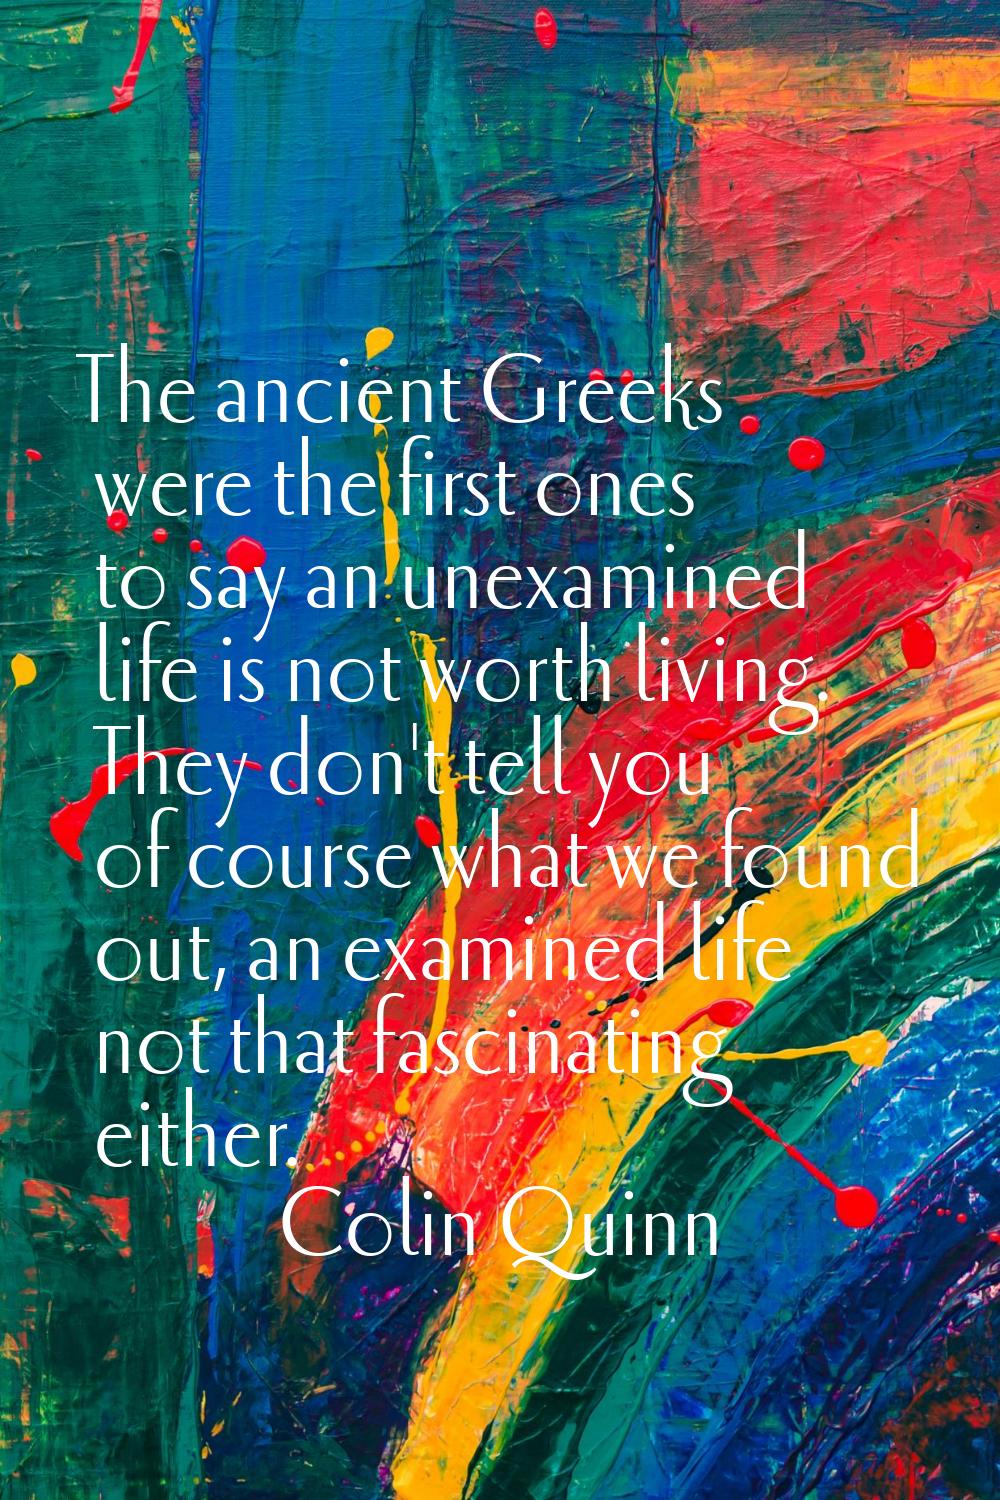 The ancient Greeks were the first ones to say an unexamined life is not worth living. They don't te